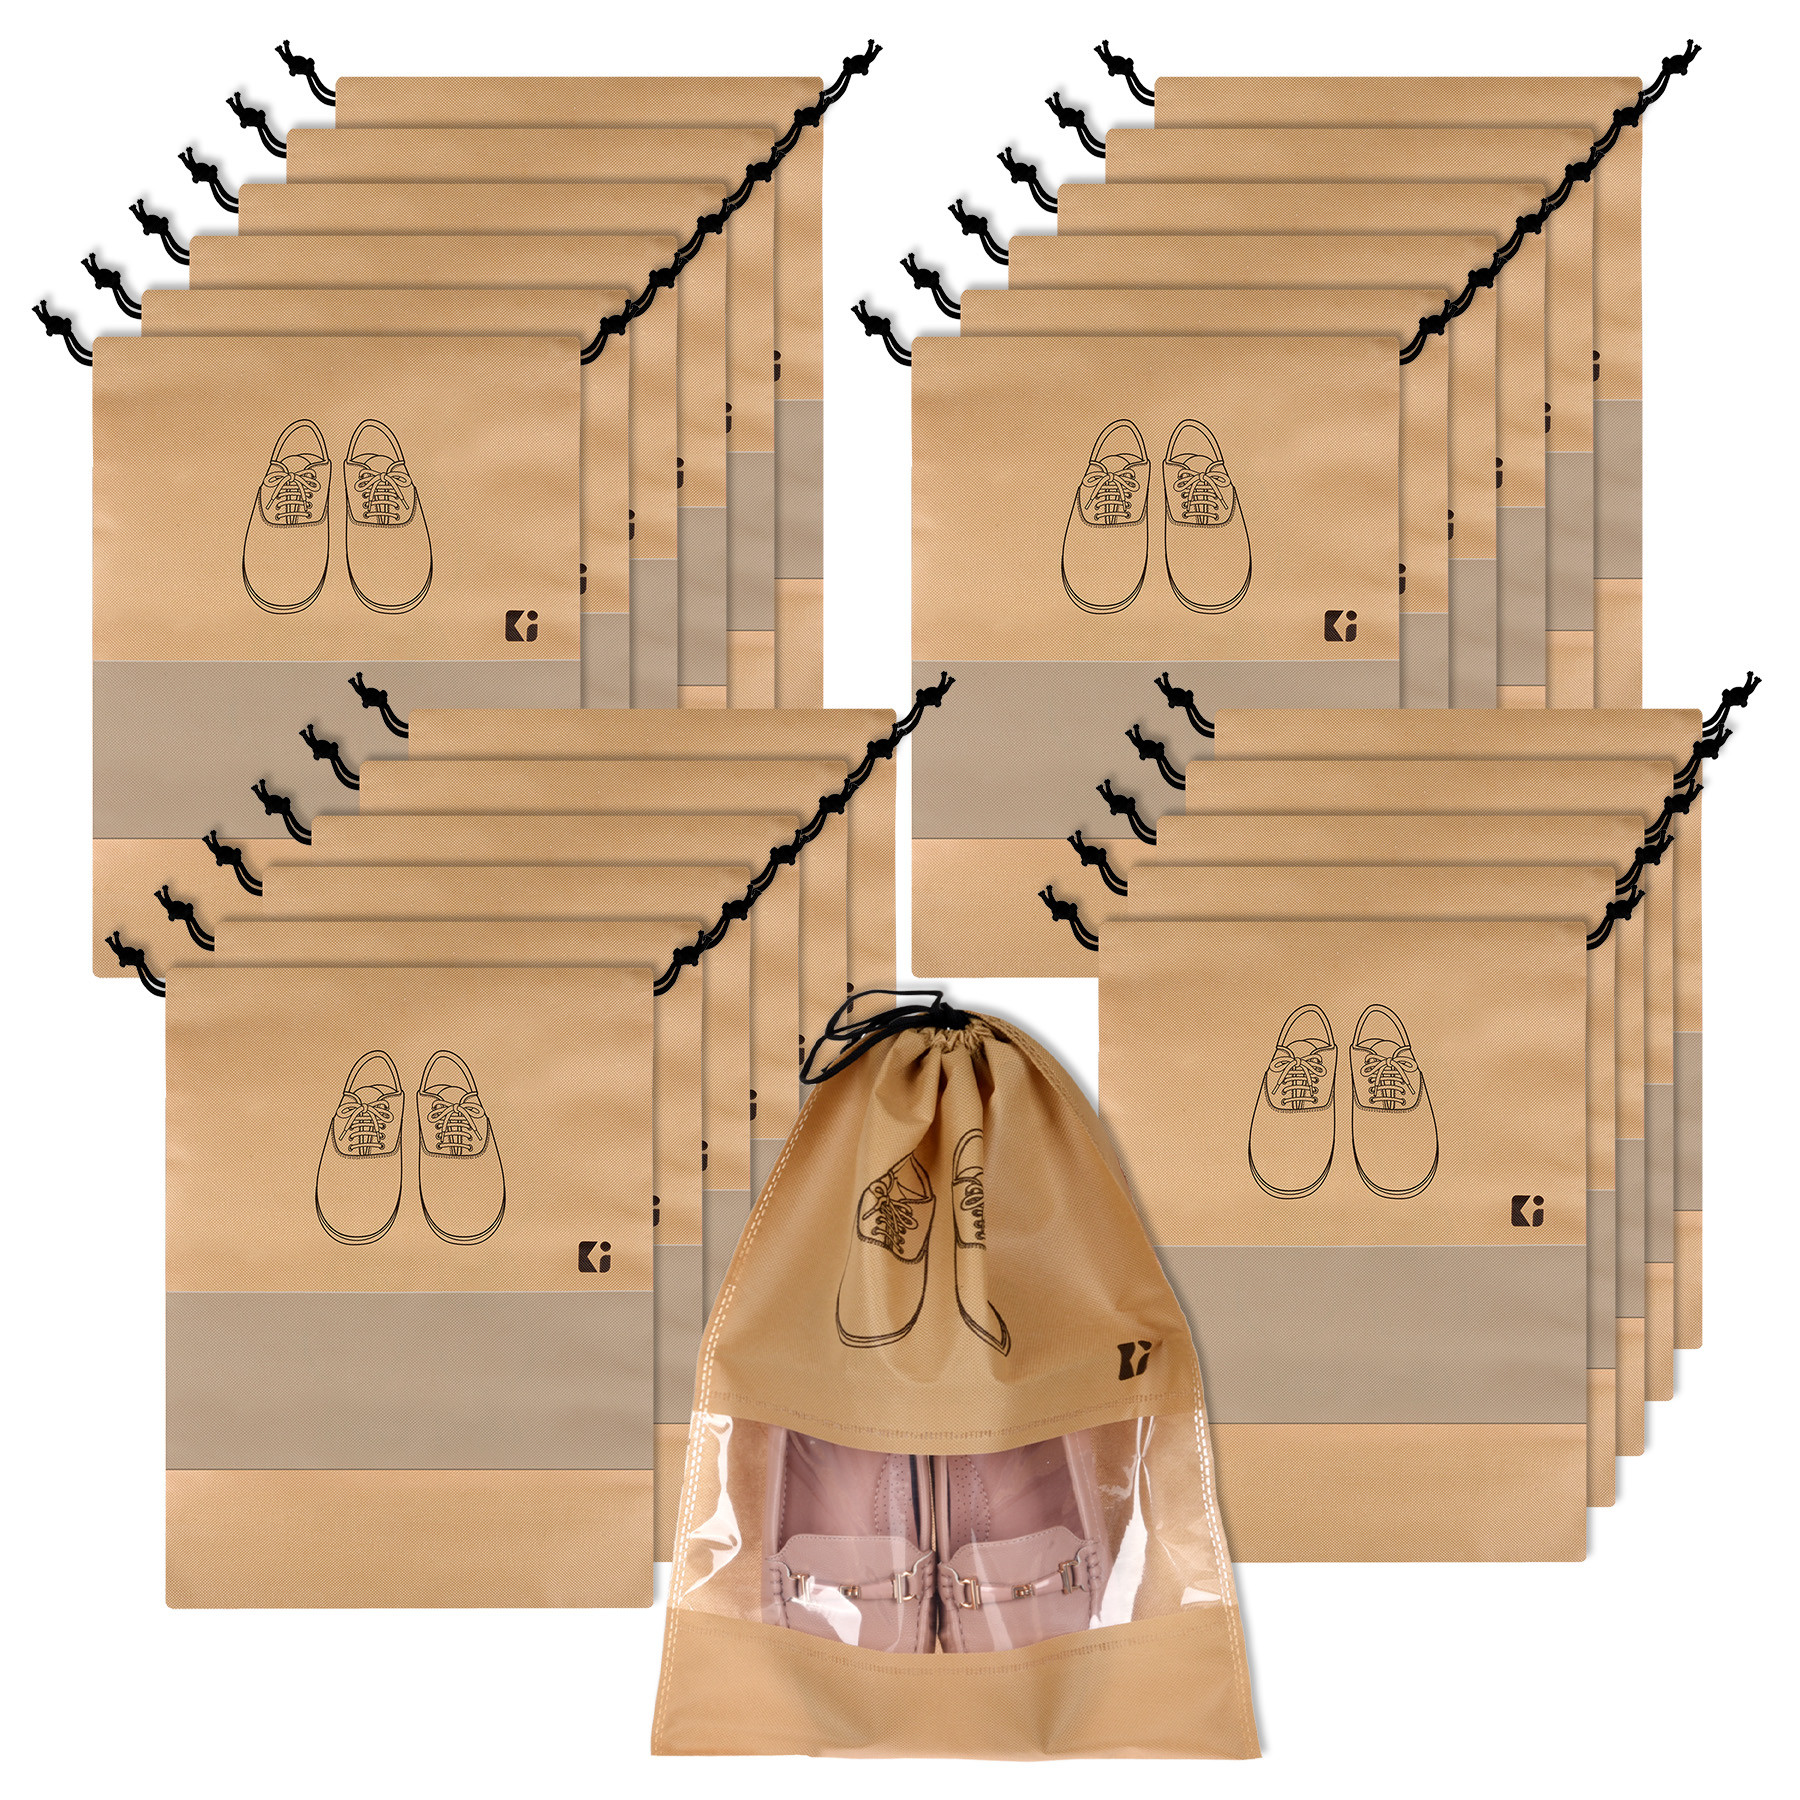 Kuber Industries Shoe Bags | Shoe Bags for Travel | Non-Woven Shoe Storage Bags | Storage Organizers Set | Shoe Cover with Transparent Window | Shoe Dori Cover | Beige